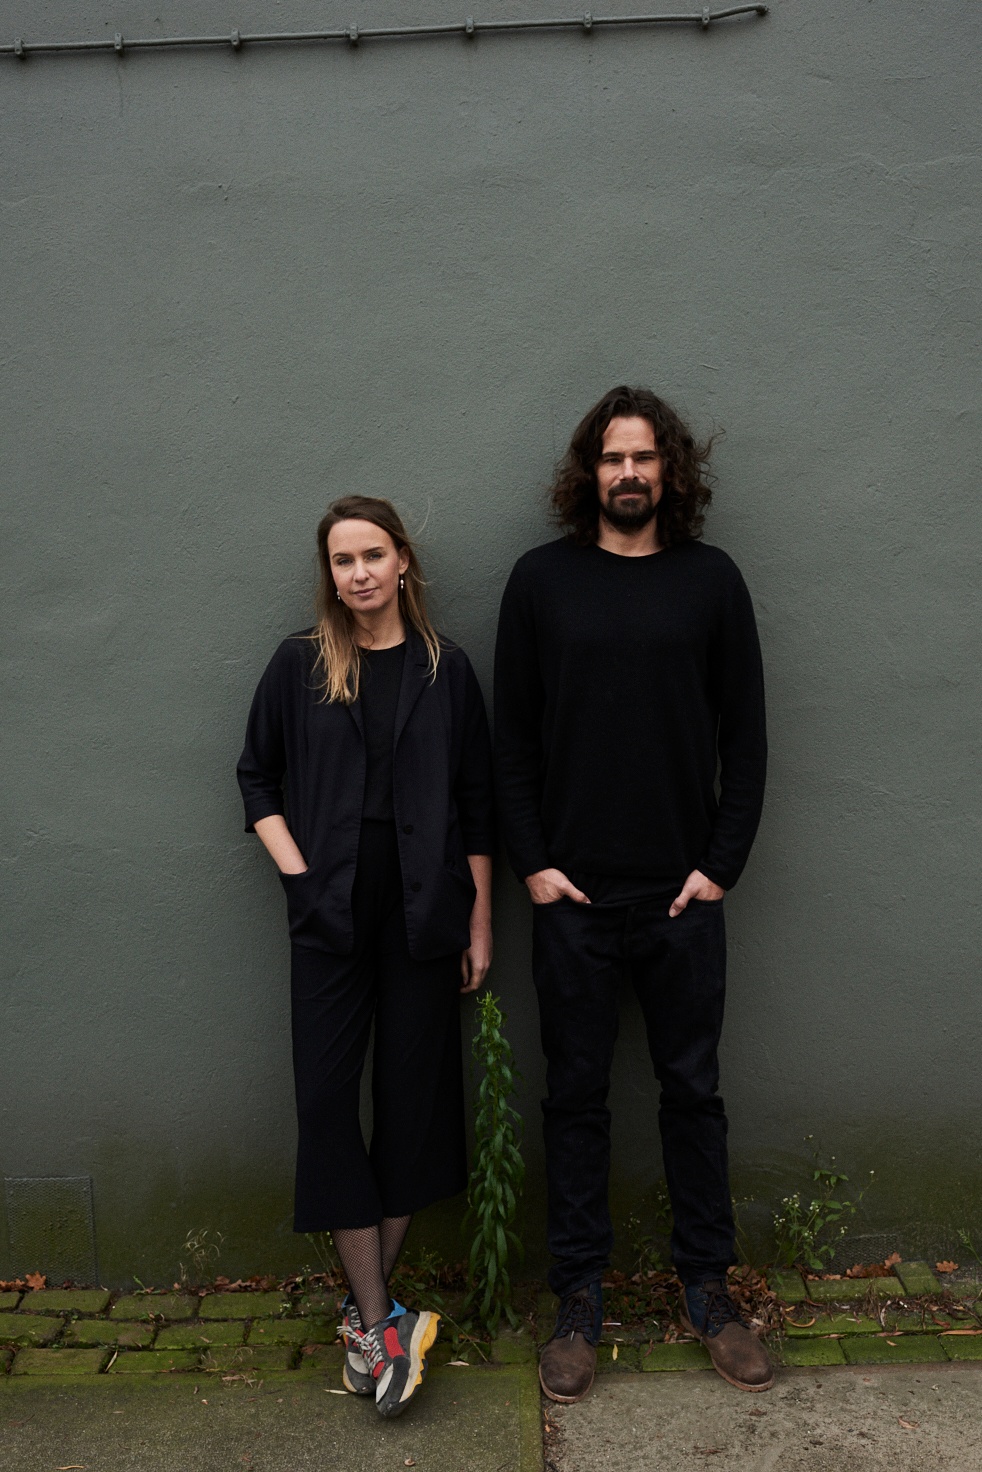 The artists of DRIFT, Lonneke Gordijn and Ralph Nauta, standing in dark outfits side by side against a dark gray wall.